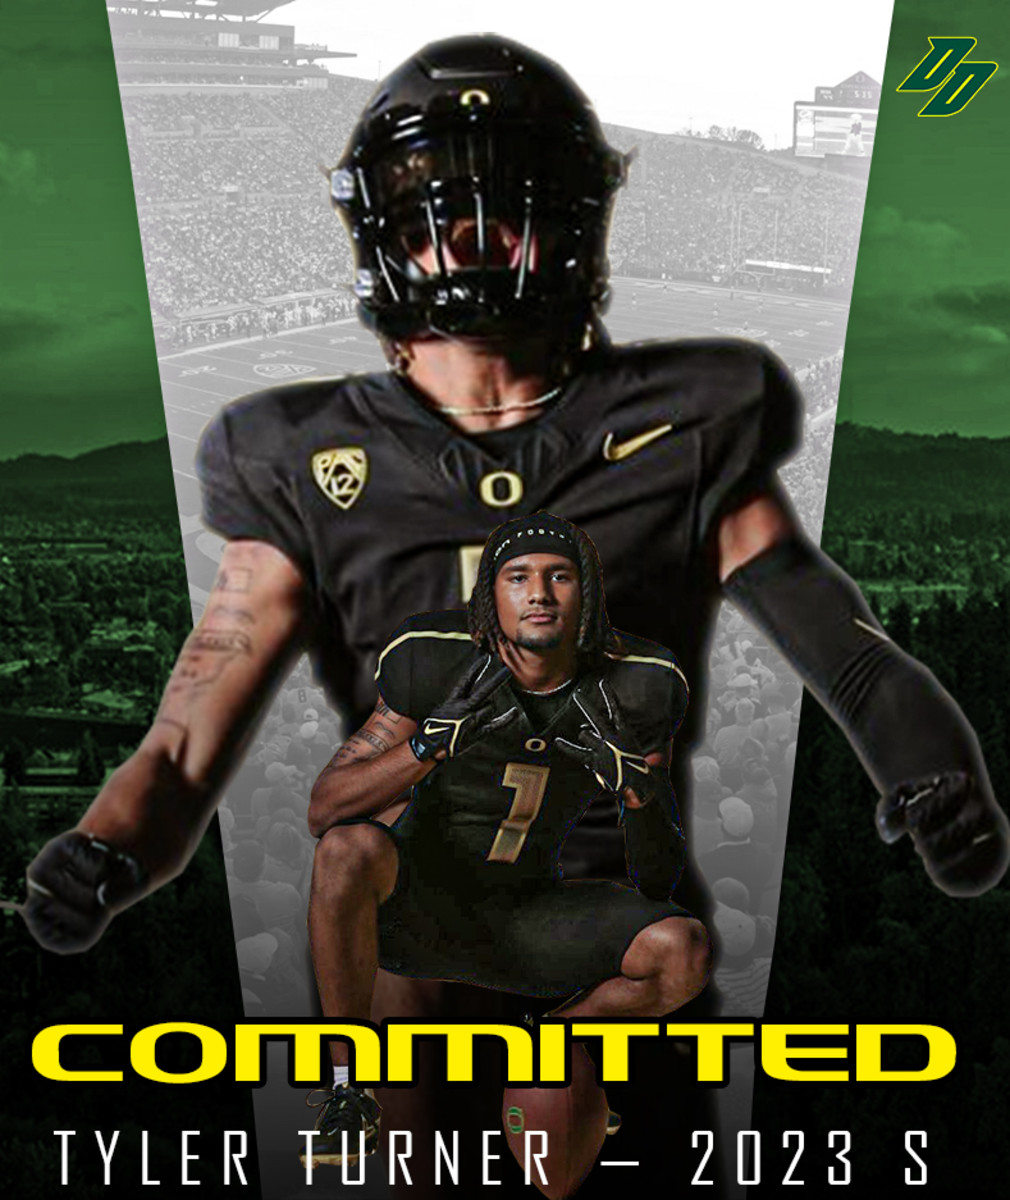 Tyler Turner is the second Texas prospect to join Oregon's 2023 class, joining wide receiver Ashton Cozart.